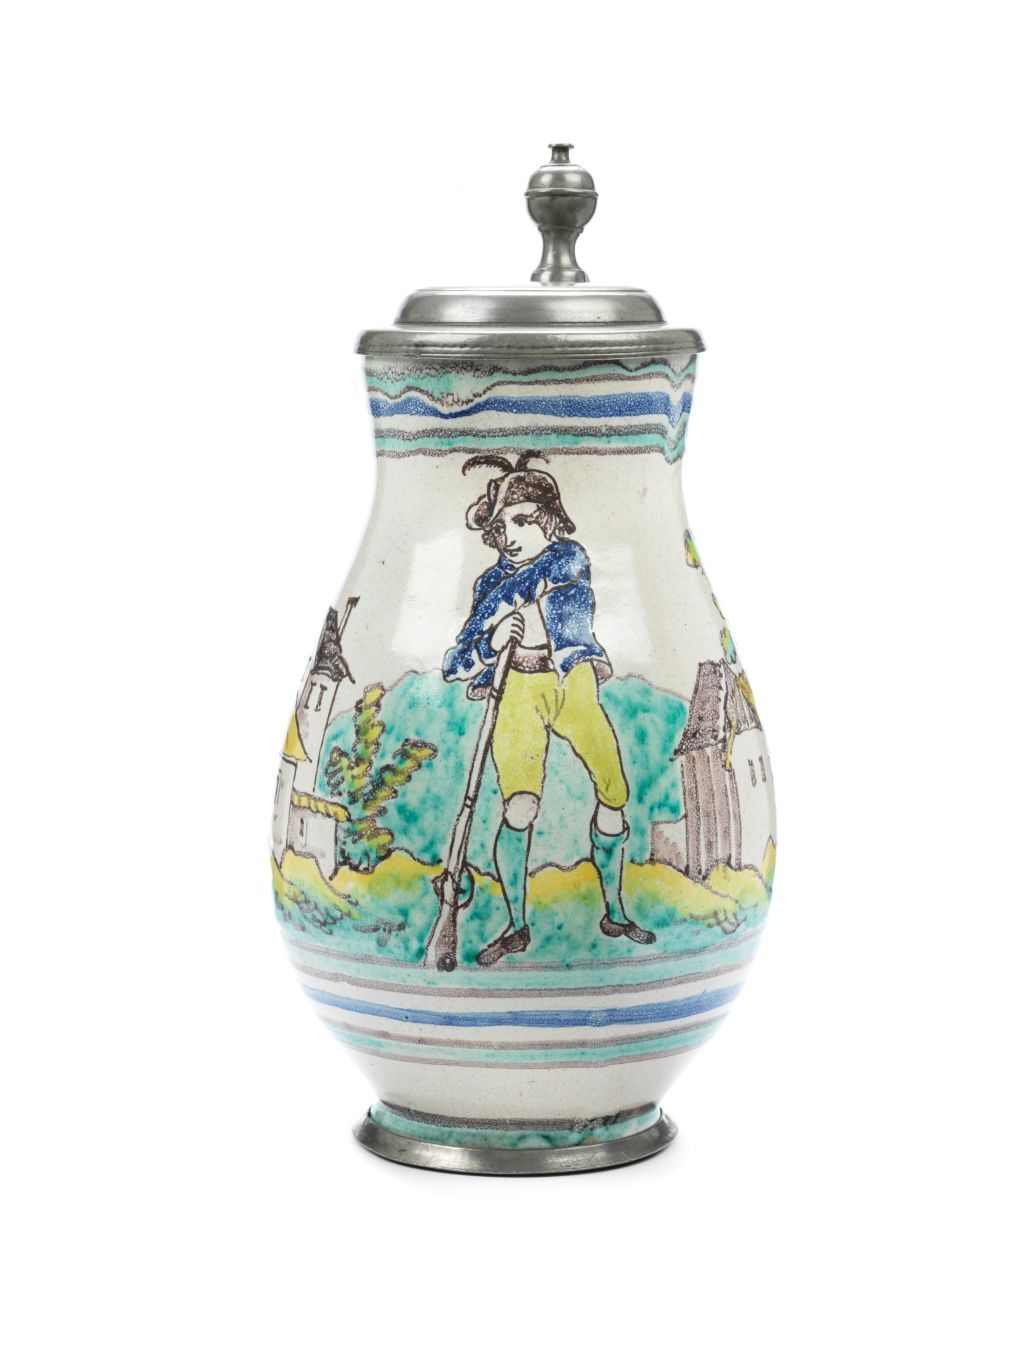 gmunden-faience-hunting-jug-18th-century